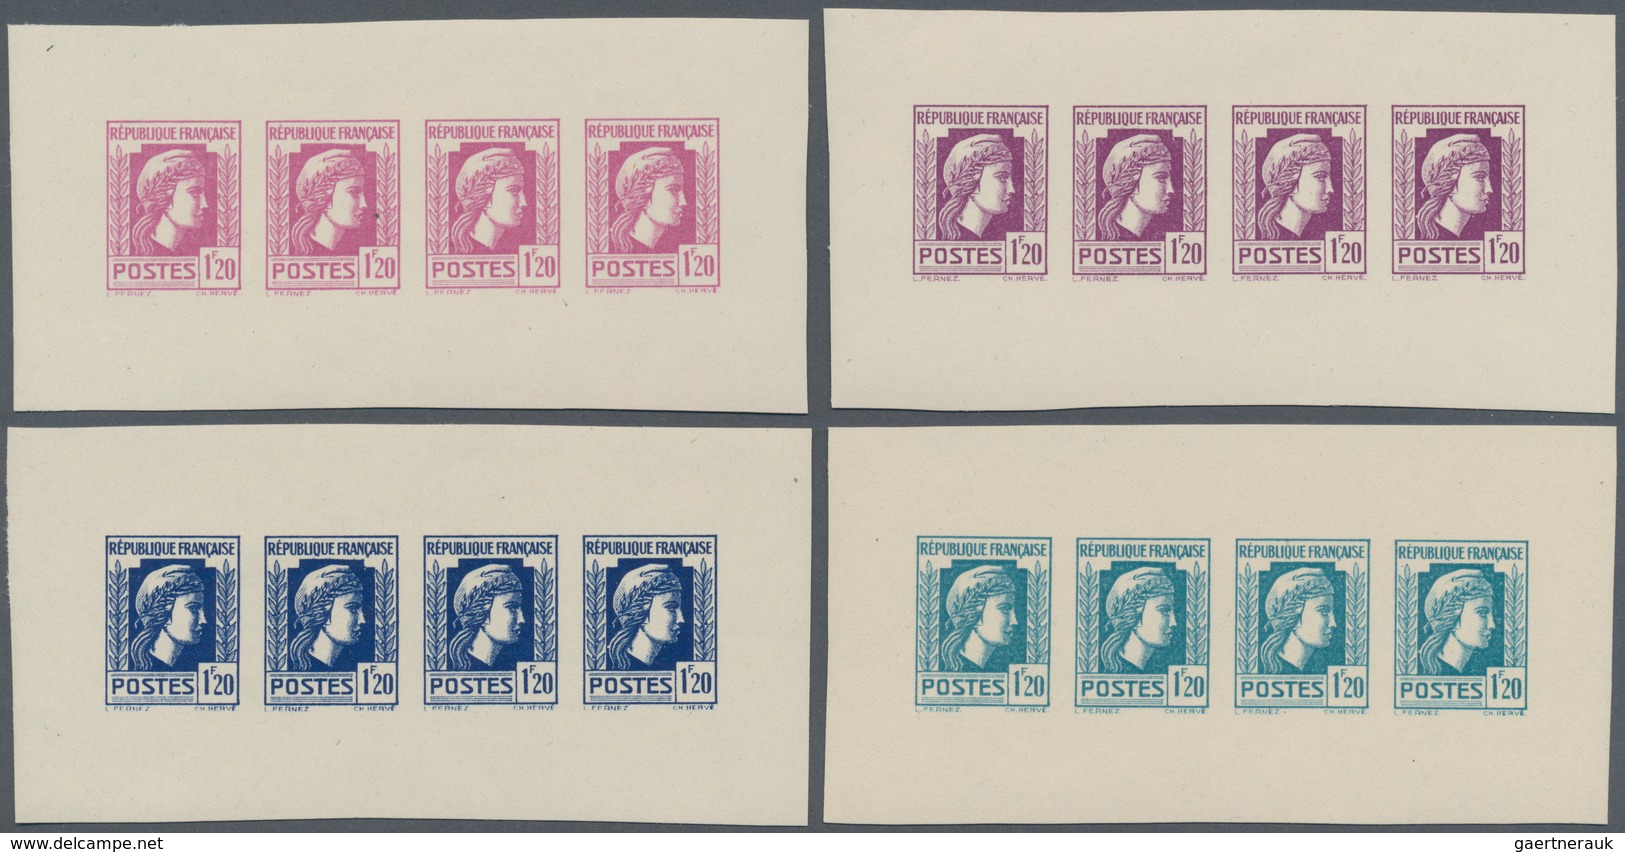 Frankreich: 1944, Definitives "Marianne", Not Issued, 1.20fr., Group Of Five Imperforated Panes Of F - Ungebraucht